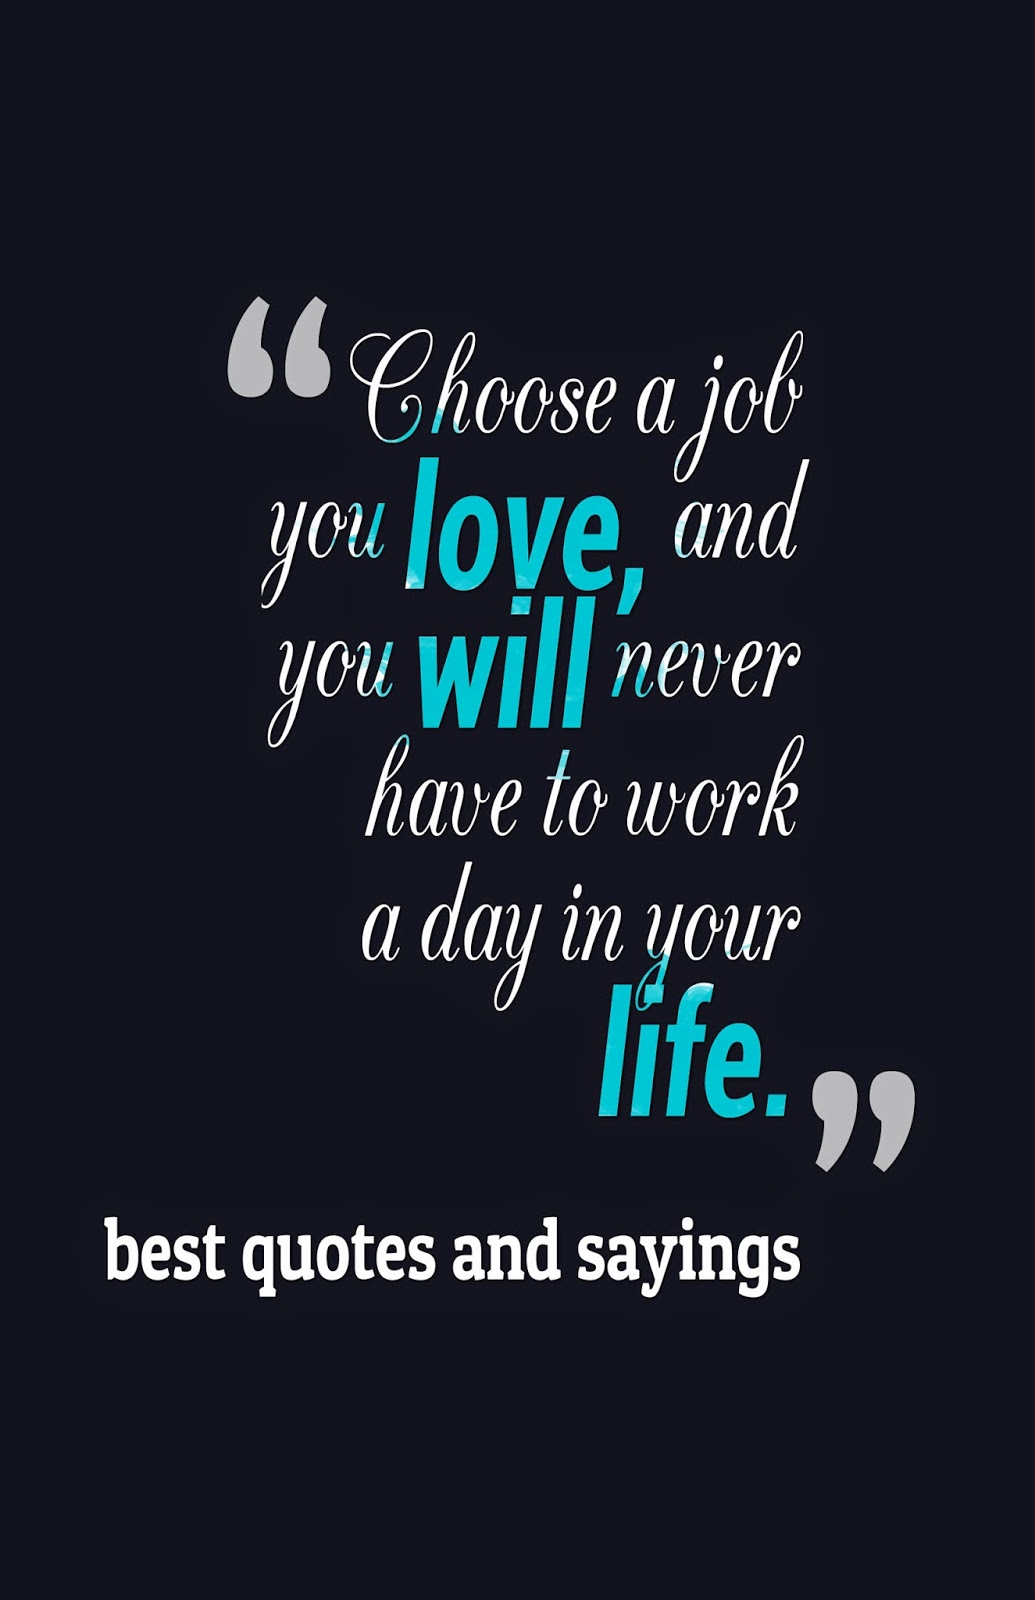 best quotes and sayings Choose a job you love and you will never have to work a day in your life